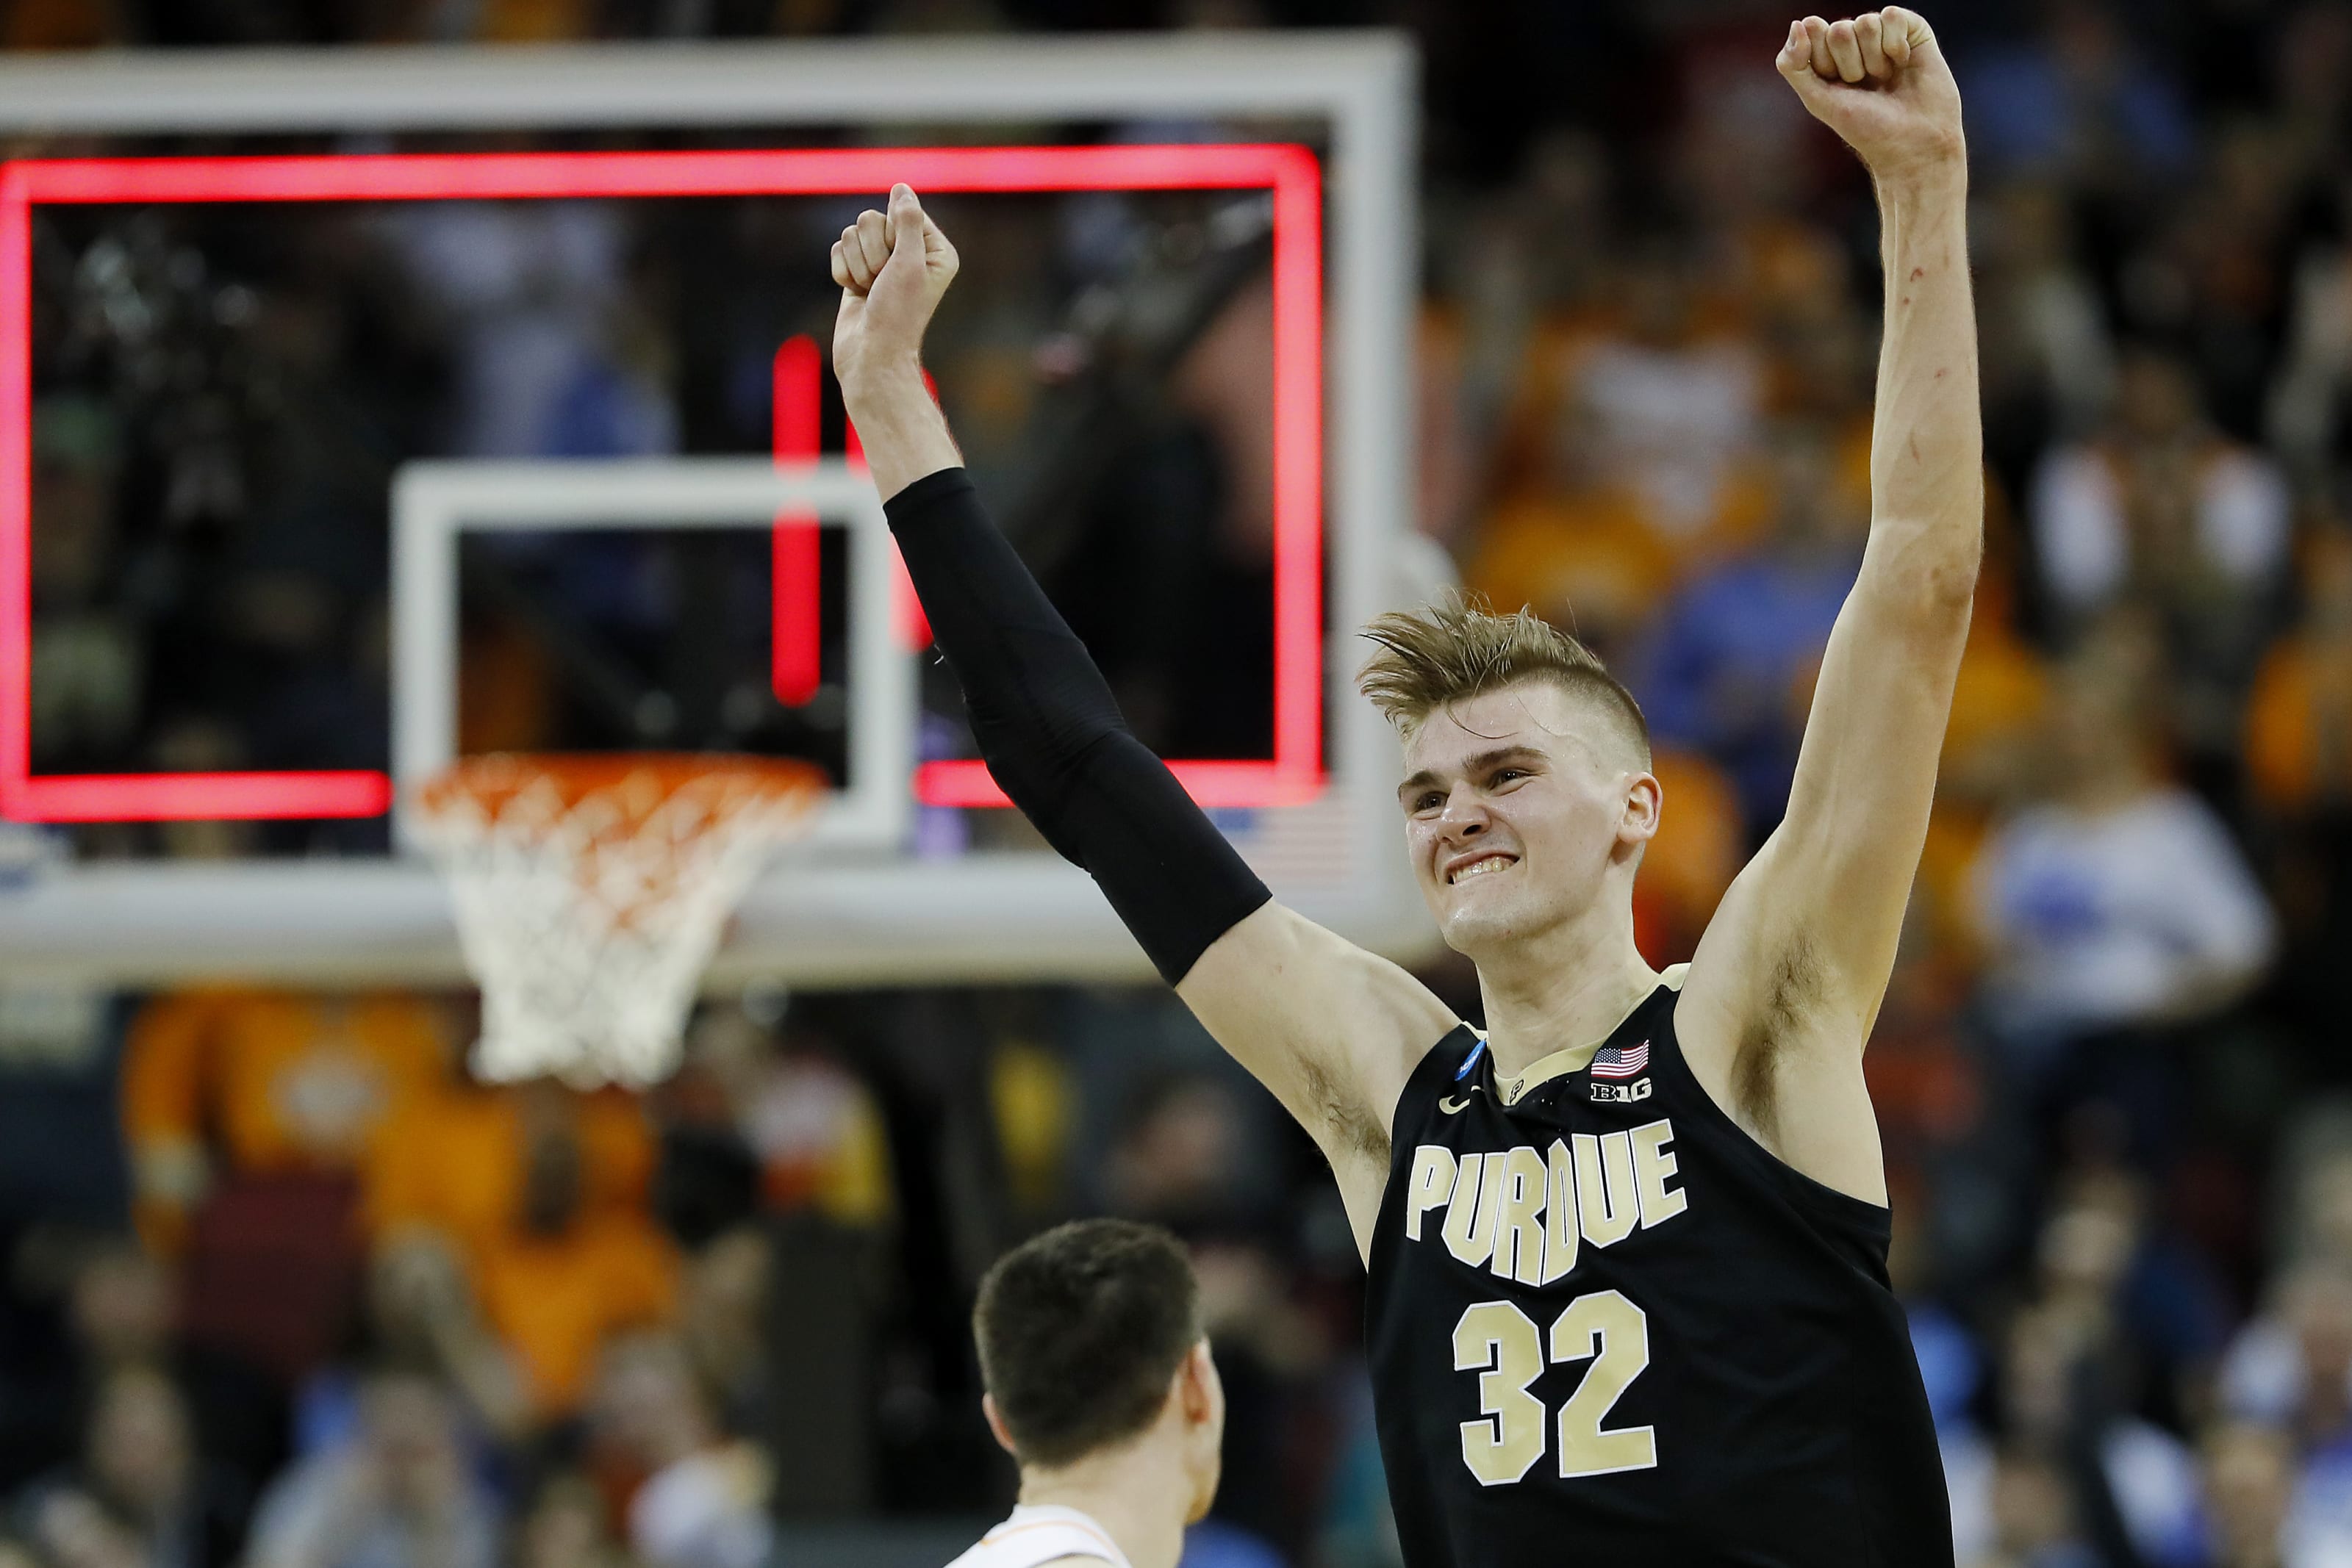 purdue-basketball-2019-20-season-preview-for-boilermakers-page-2